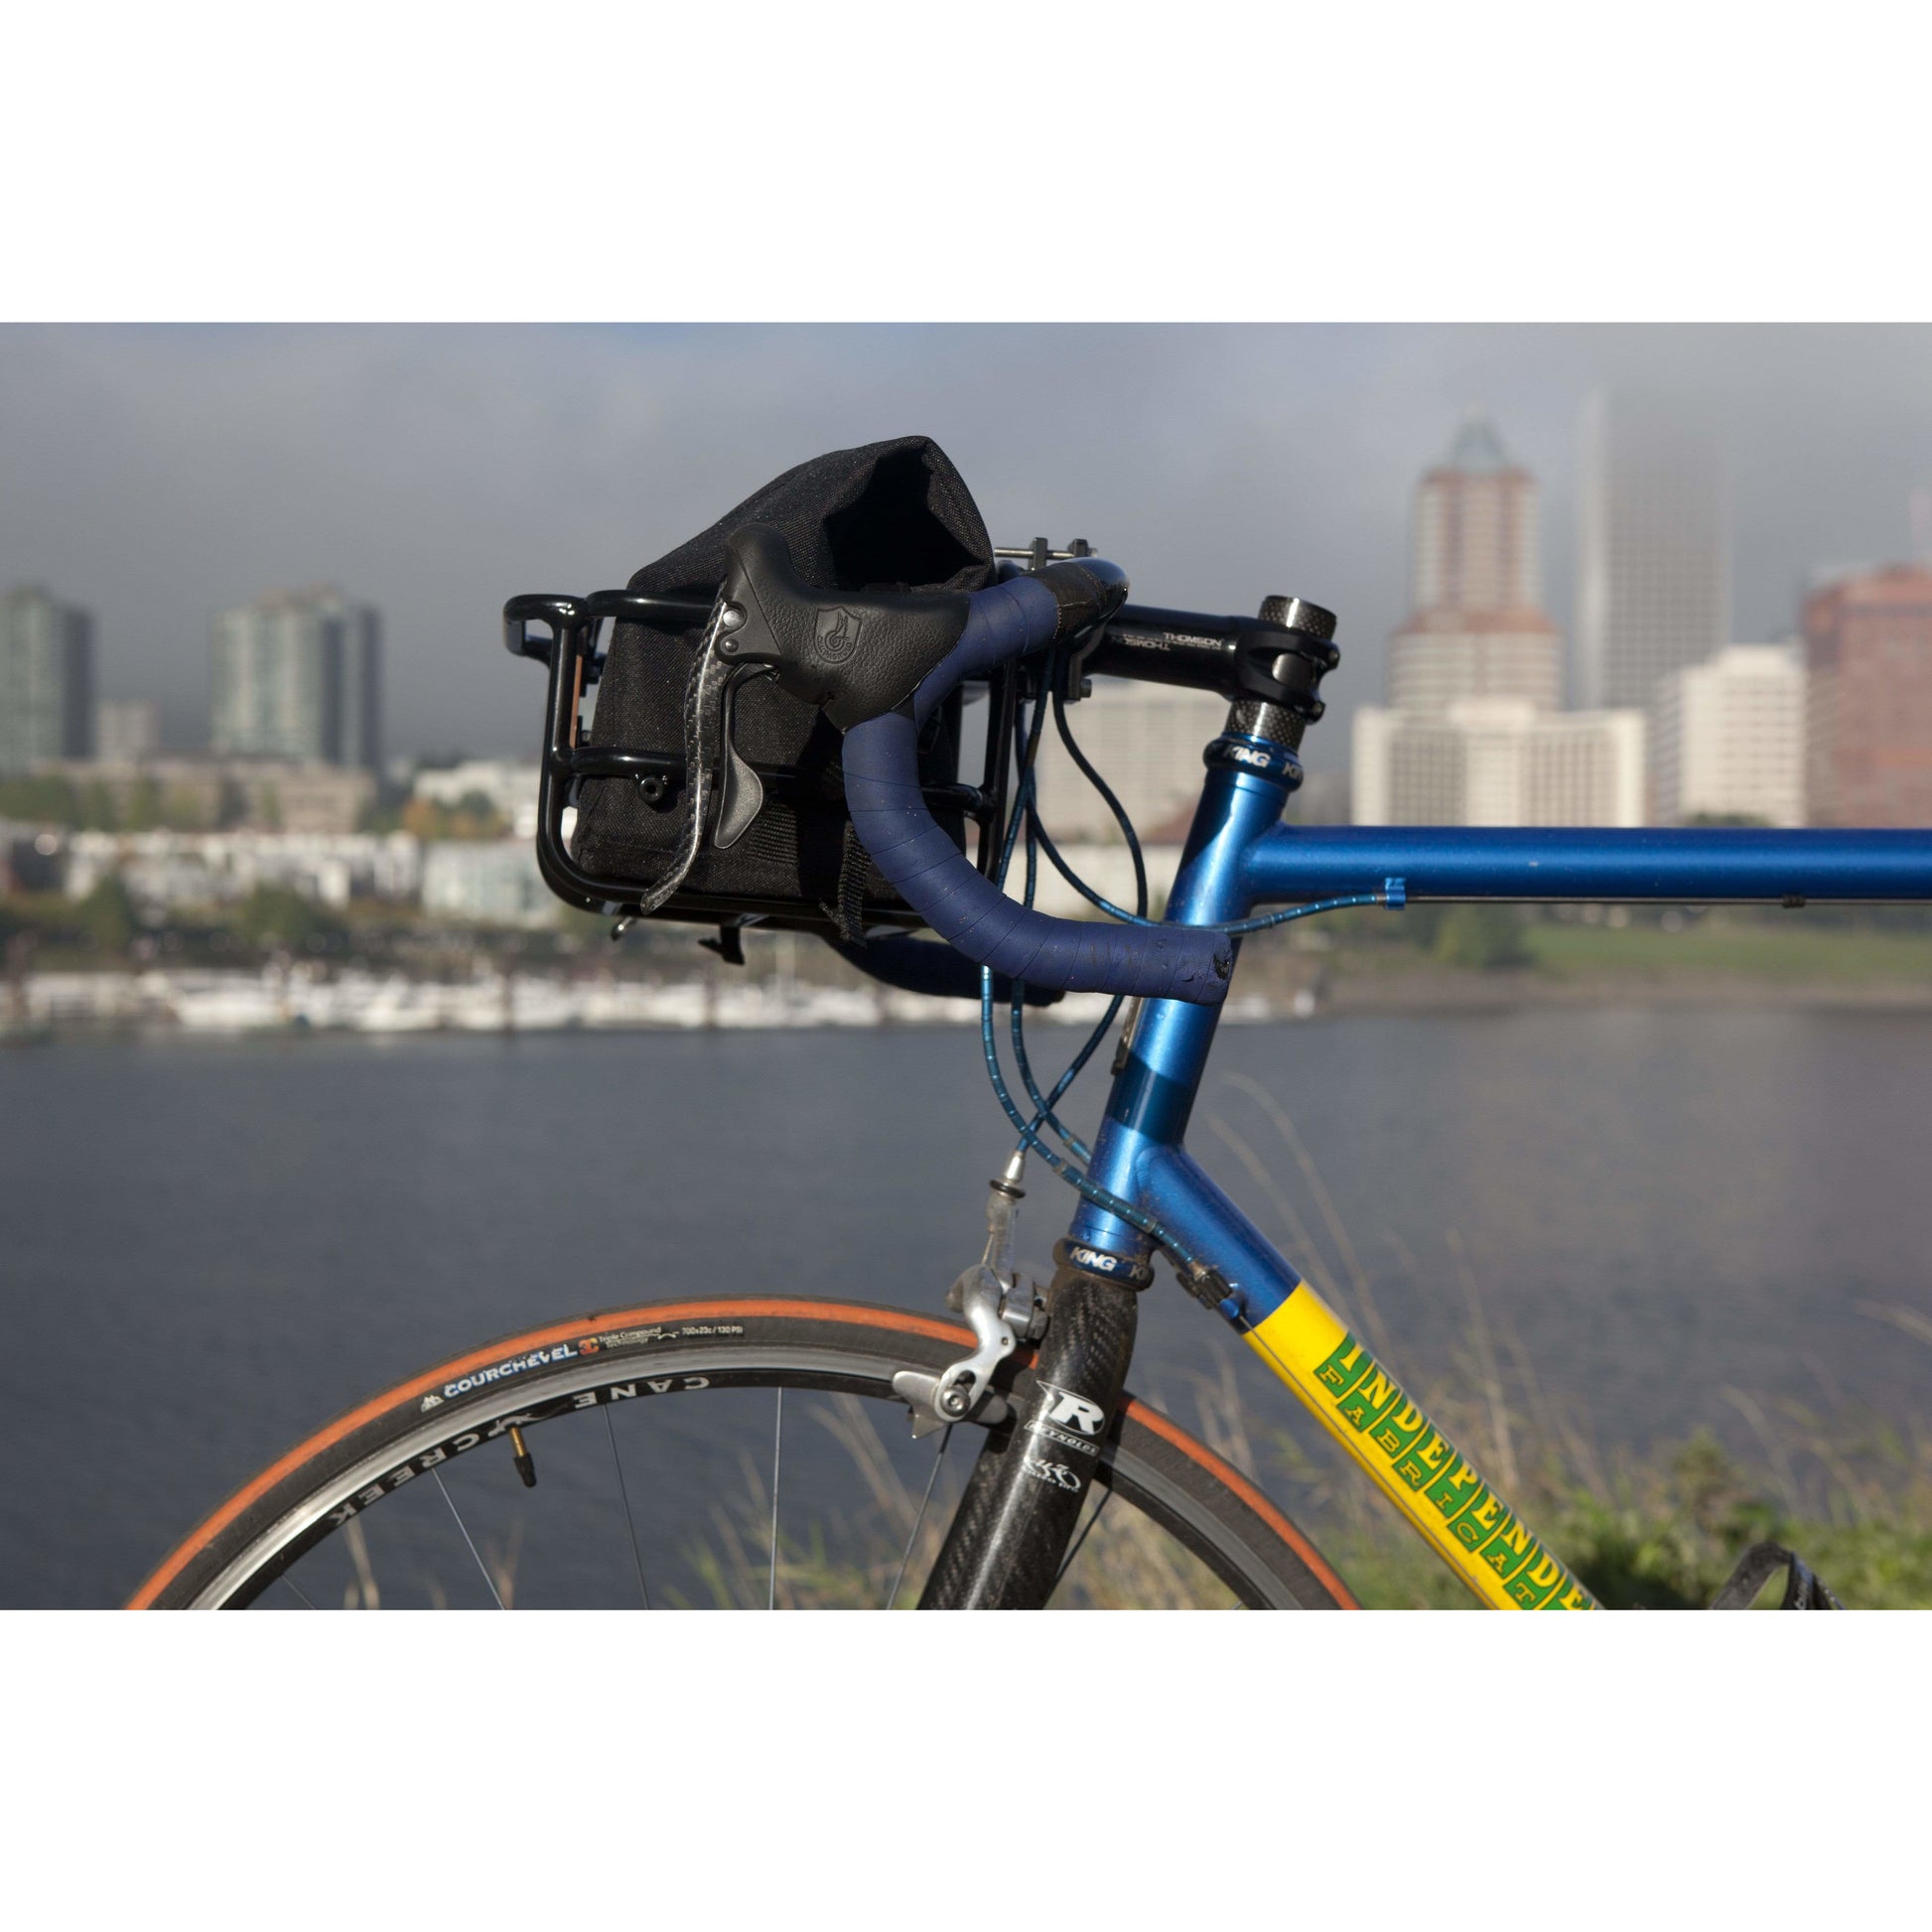 PDW Takeout Front Bike Basket w/ Water Resistant Roll-Top Bag